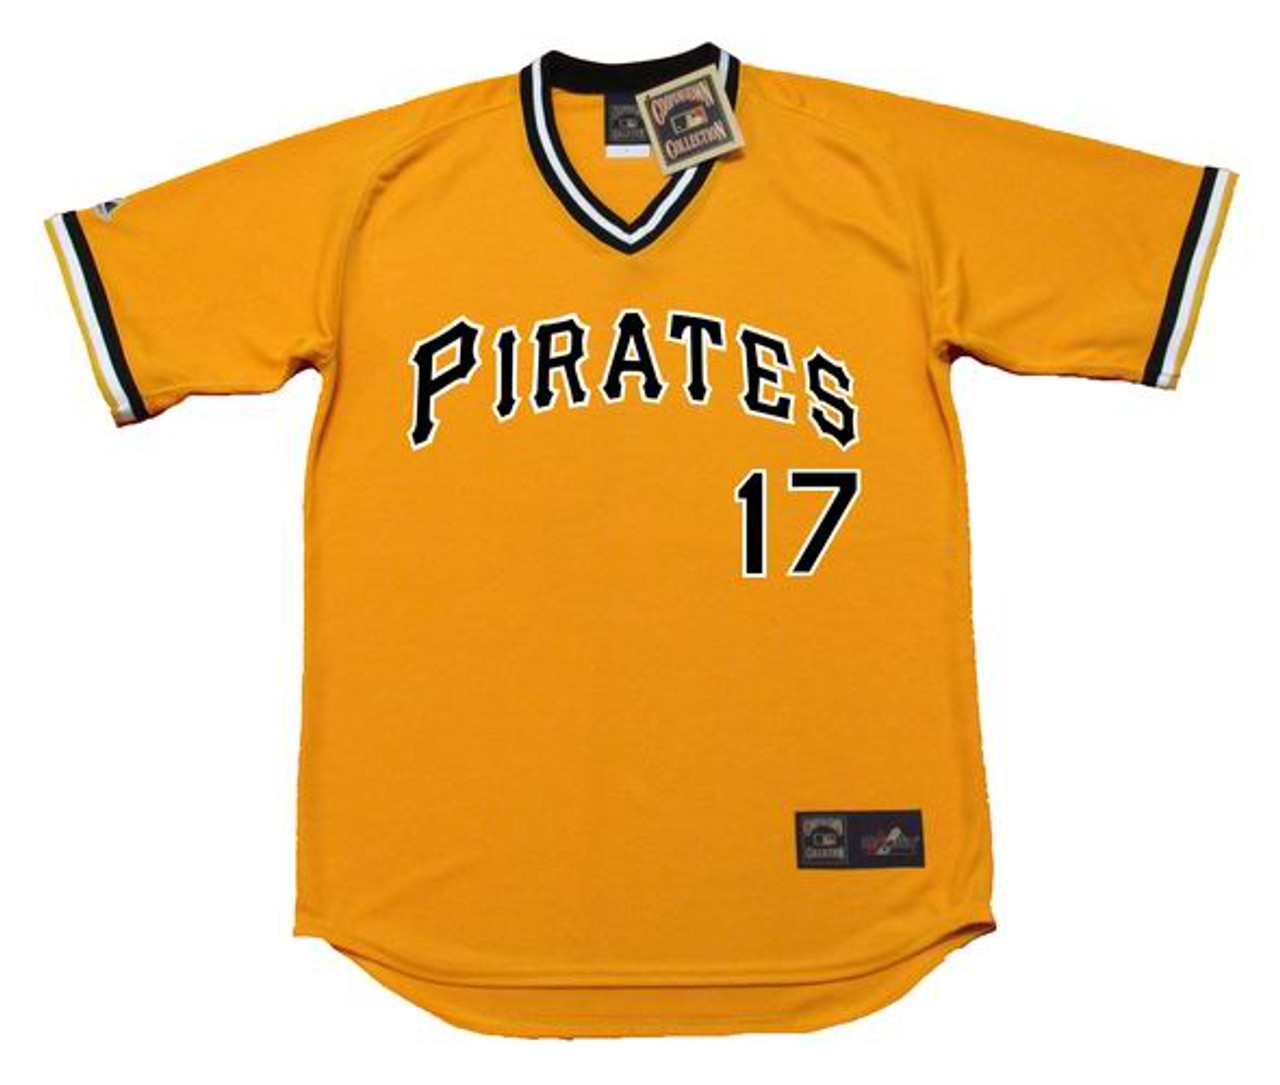 Dock Ellis Jersey - 1970's Pittsburgh Pirates Cooperstown Home